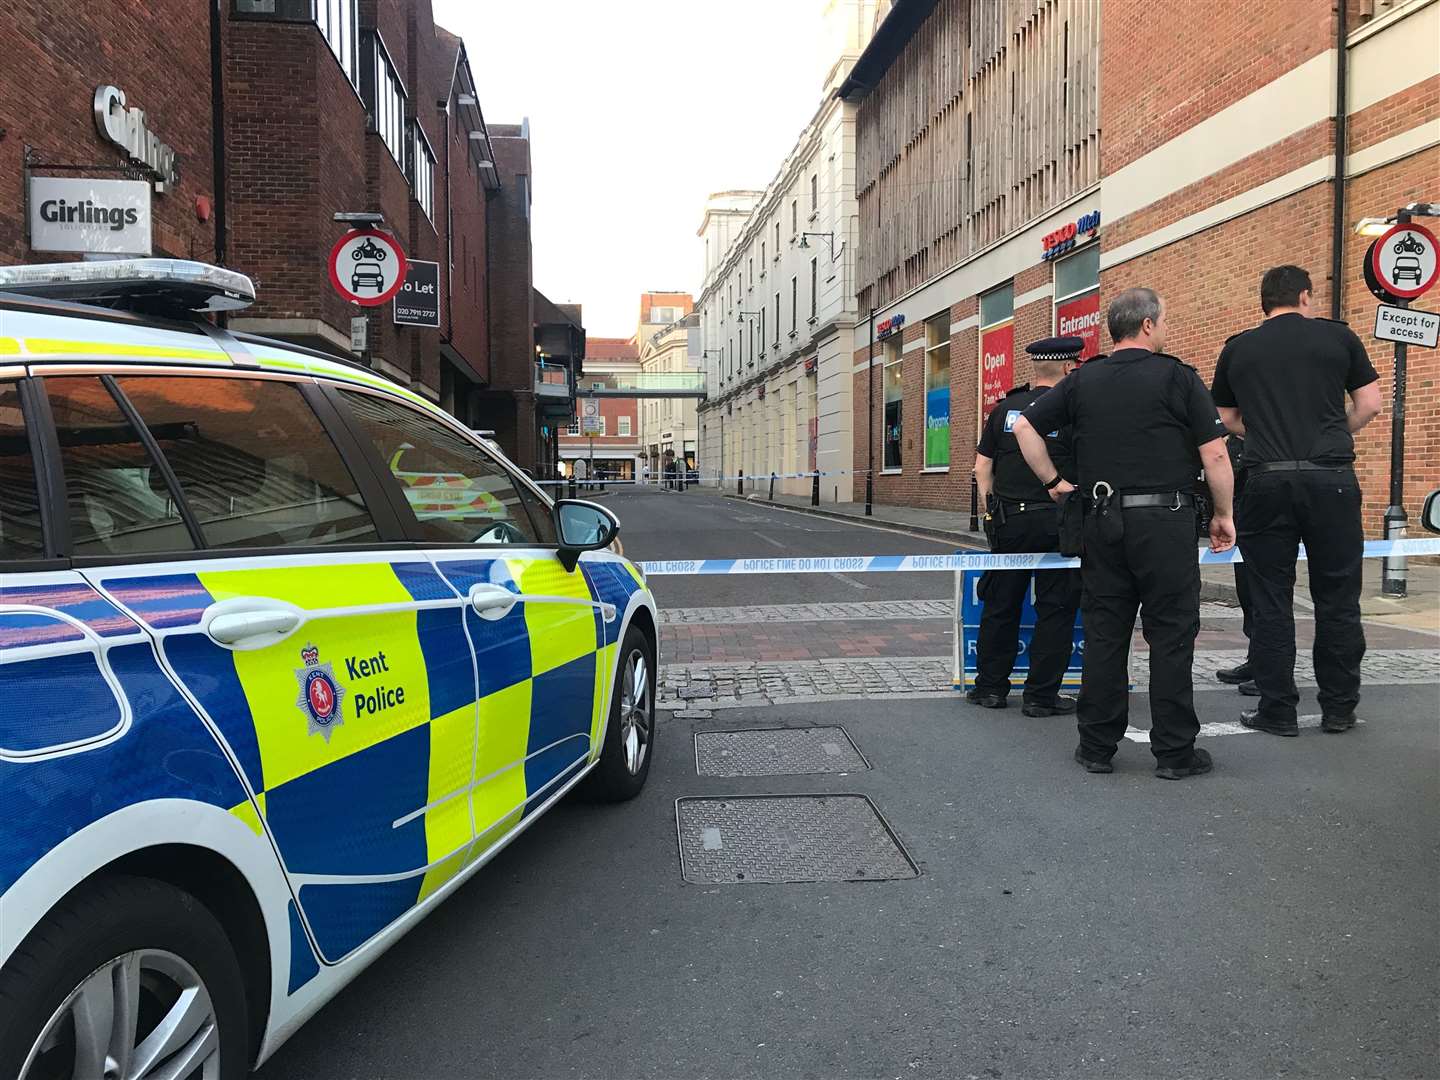 Police at the scene of the assault on Thursday evening (12148539)